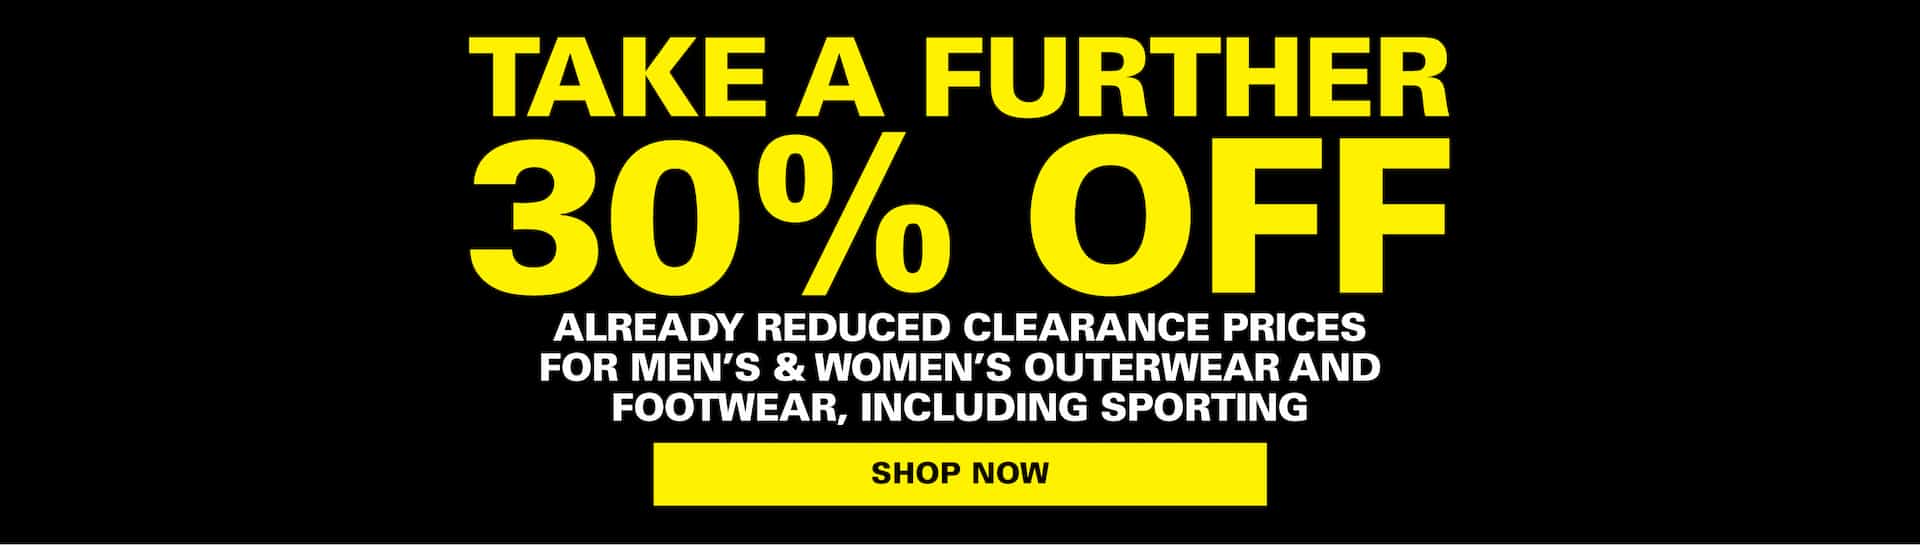 Take a further 30% OFF on clearance items